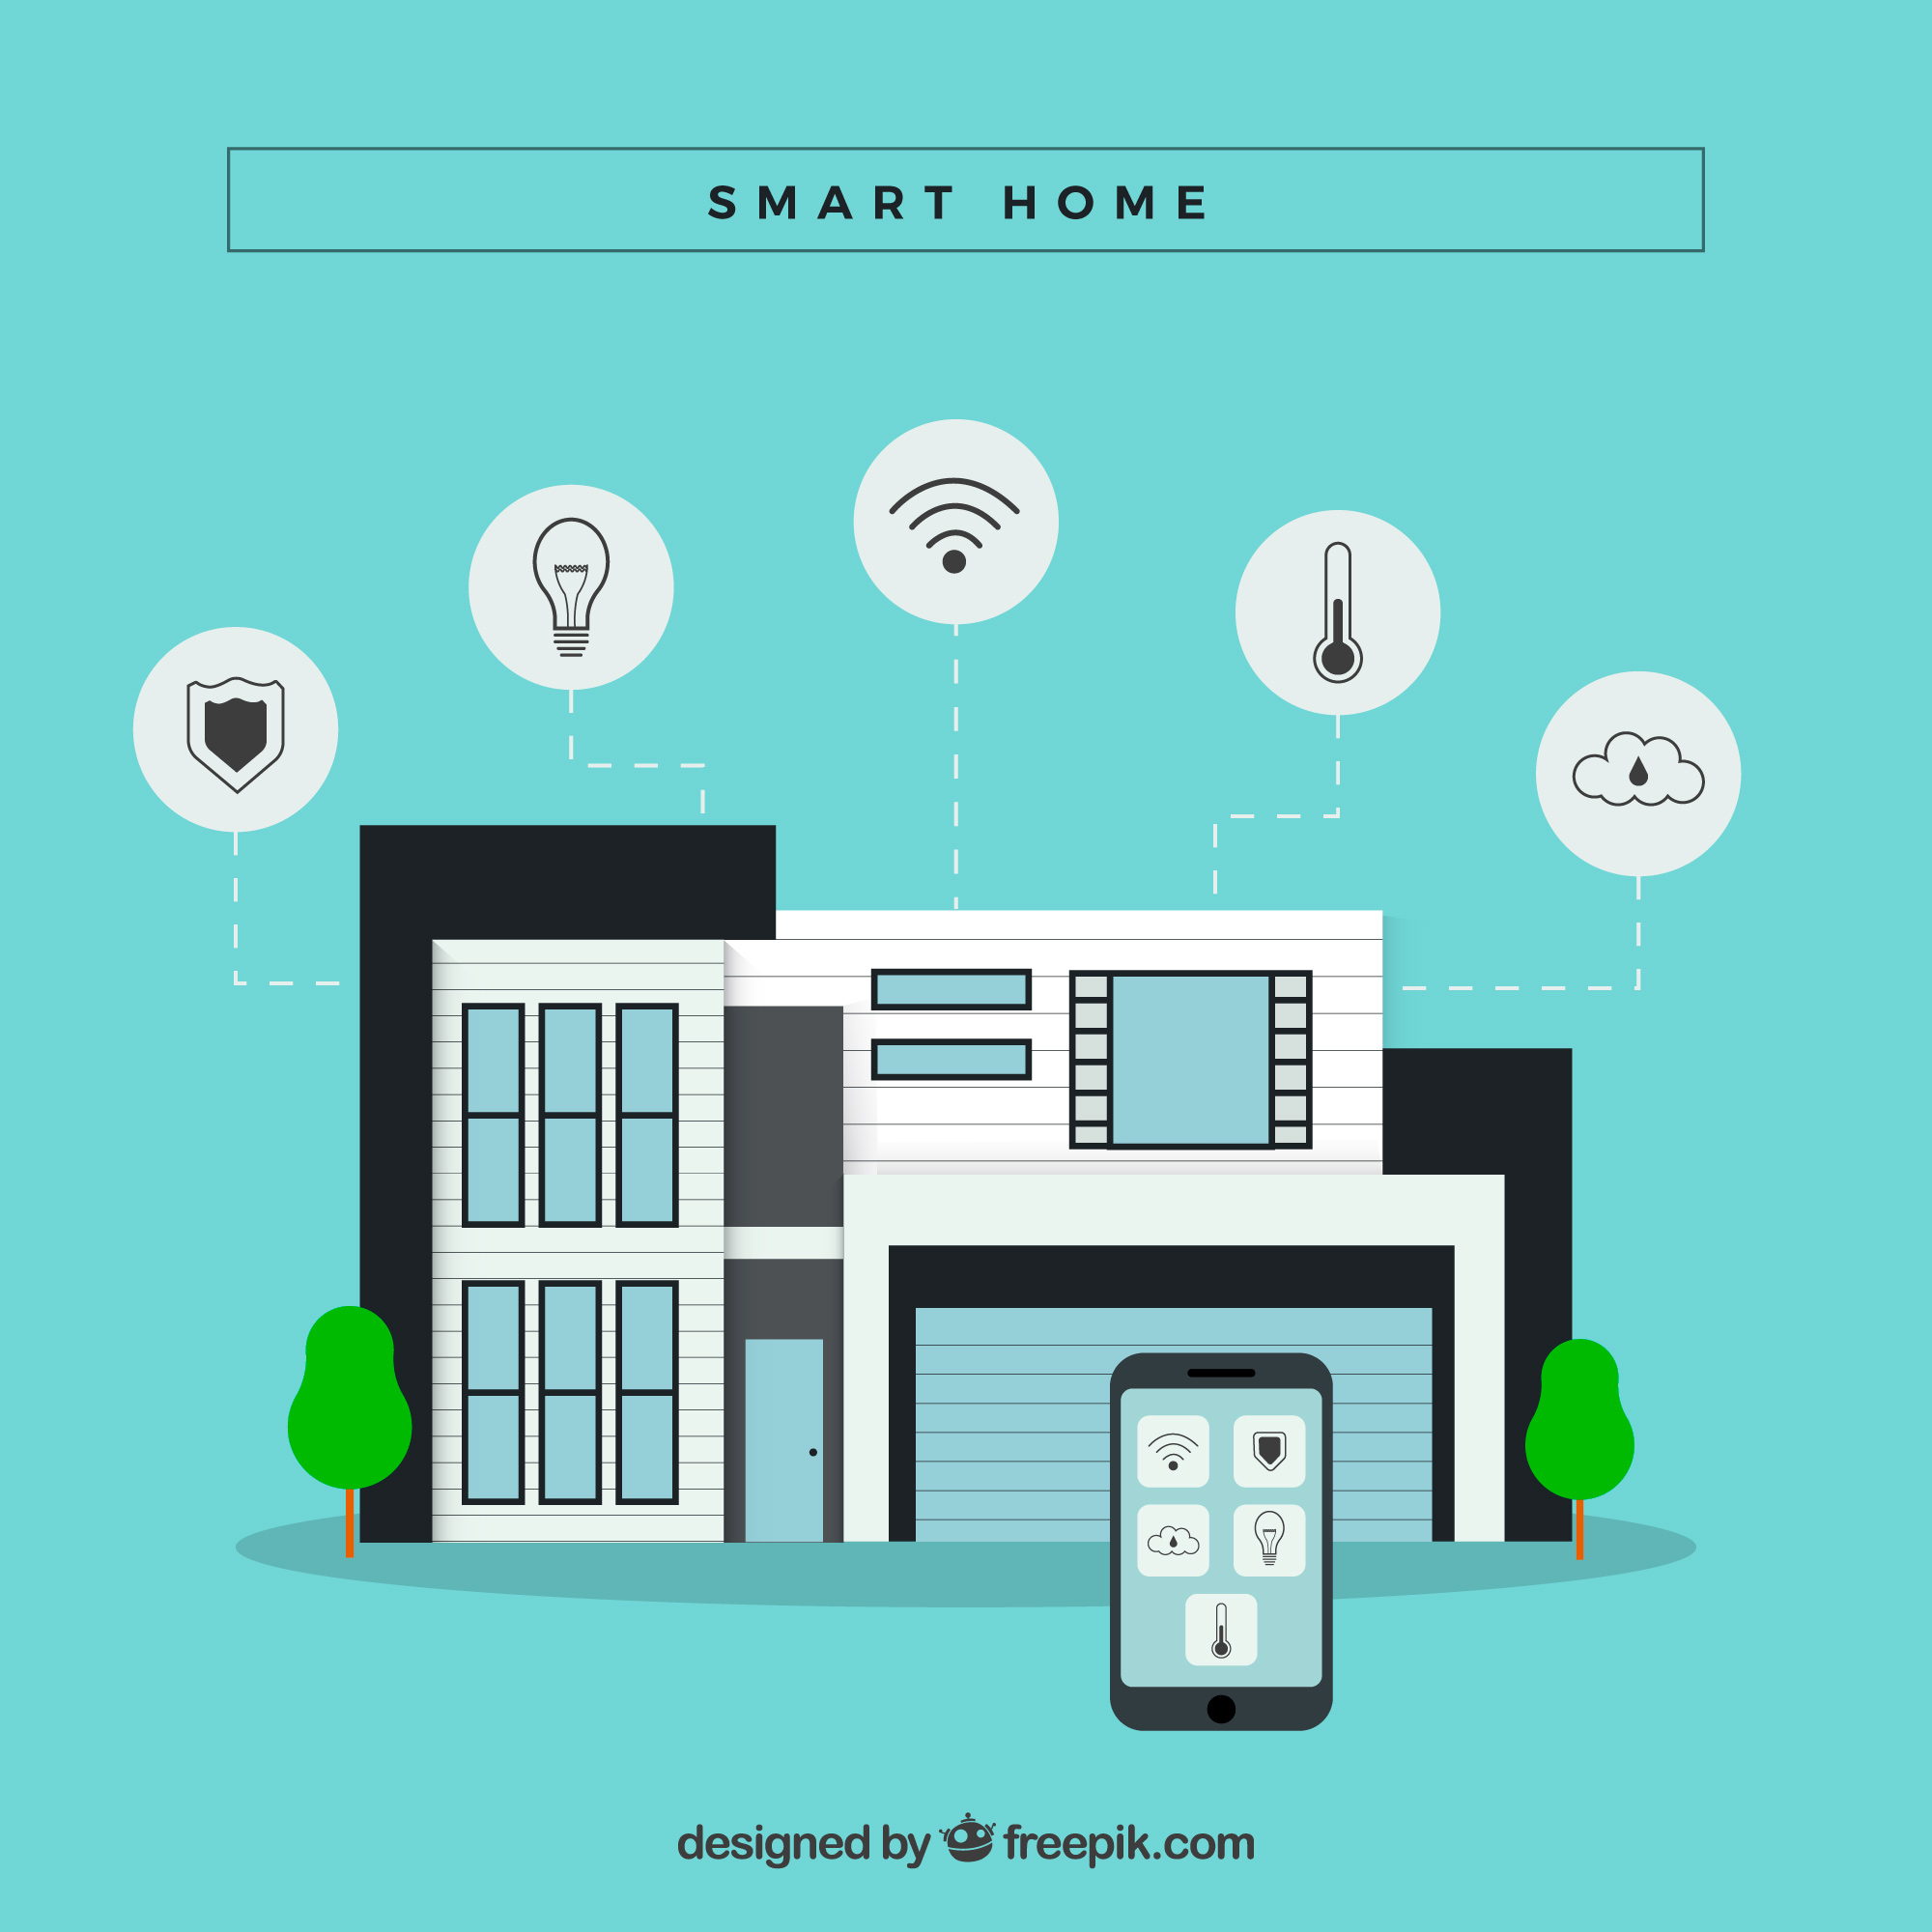 IoT in Residential Spaces